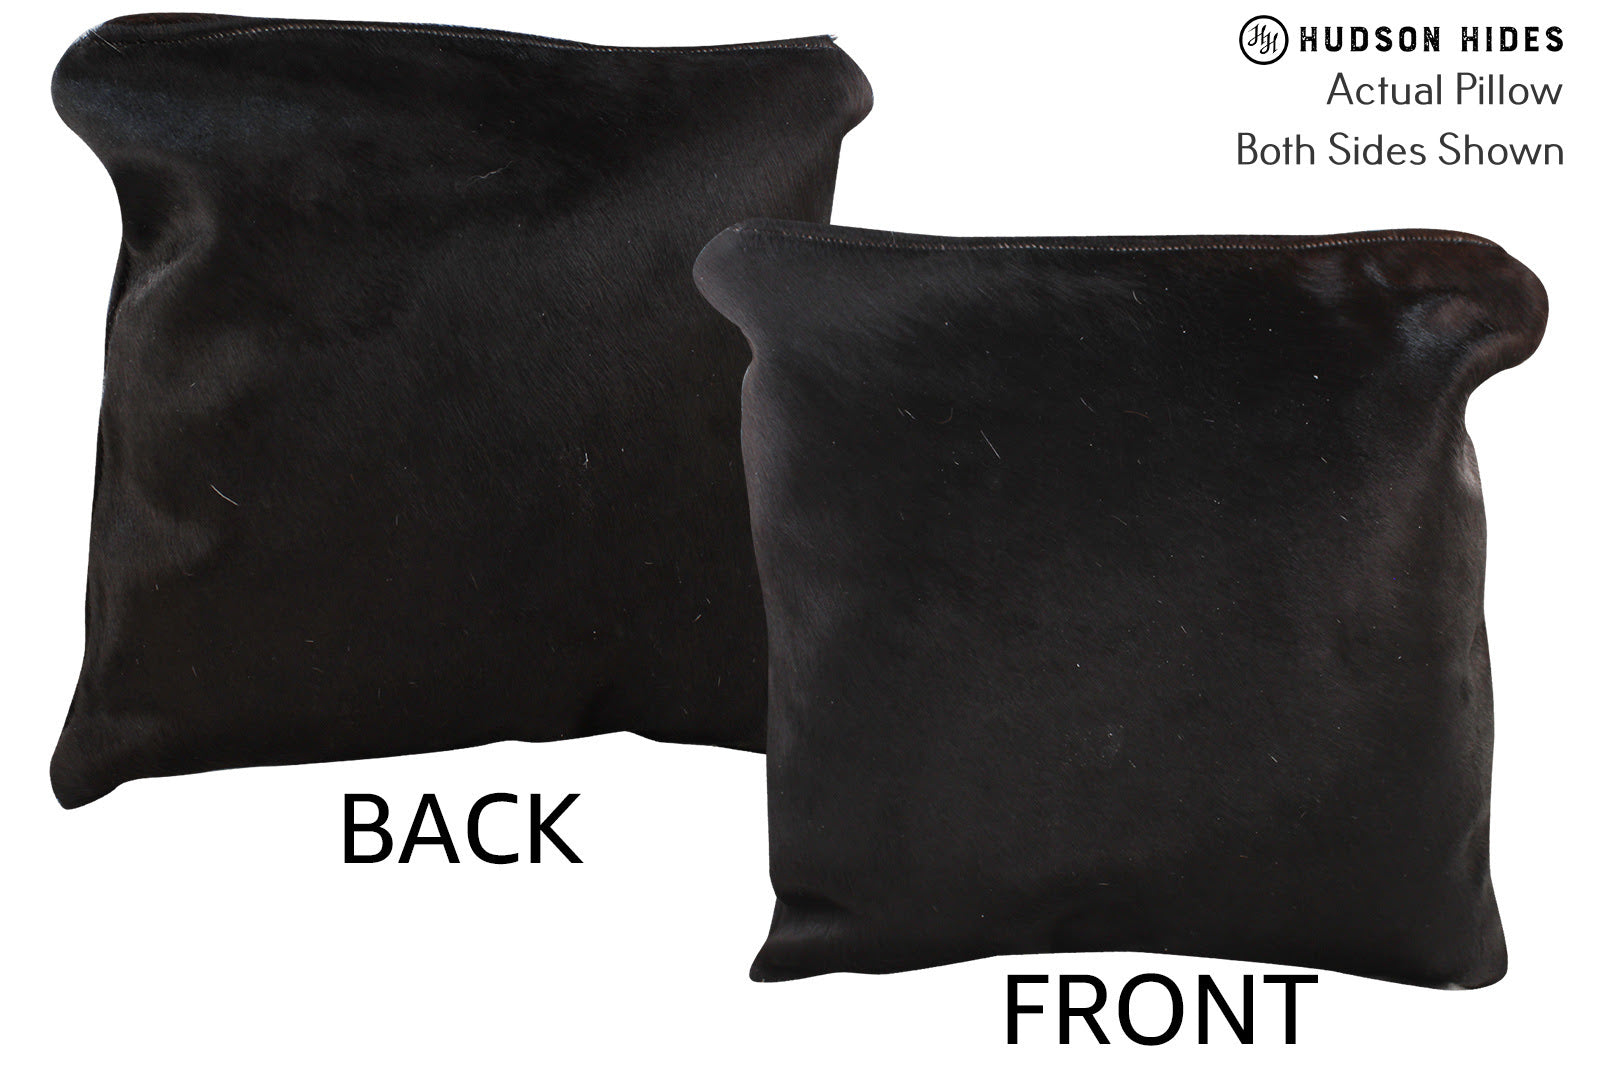 Solid Black Cowhide Pillow #74517